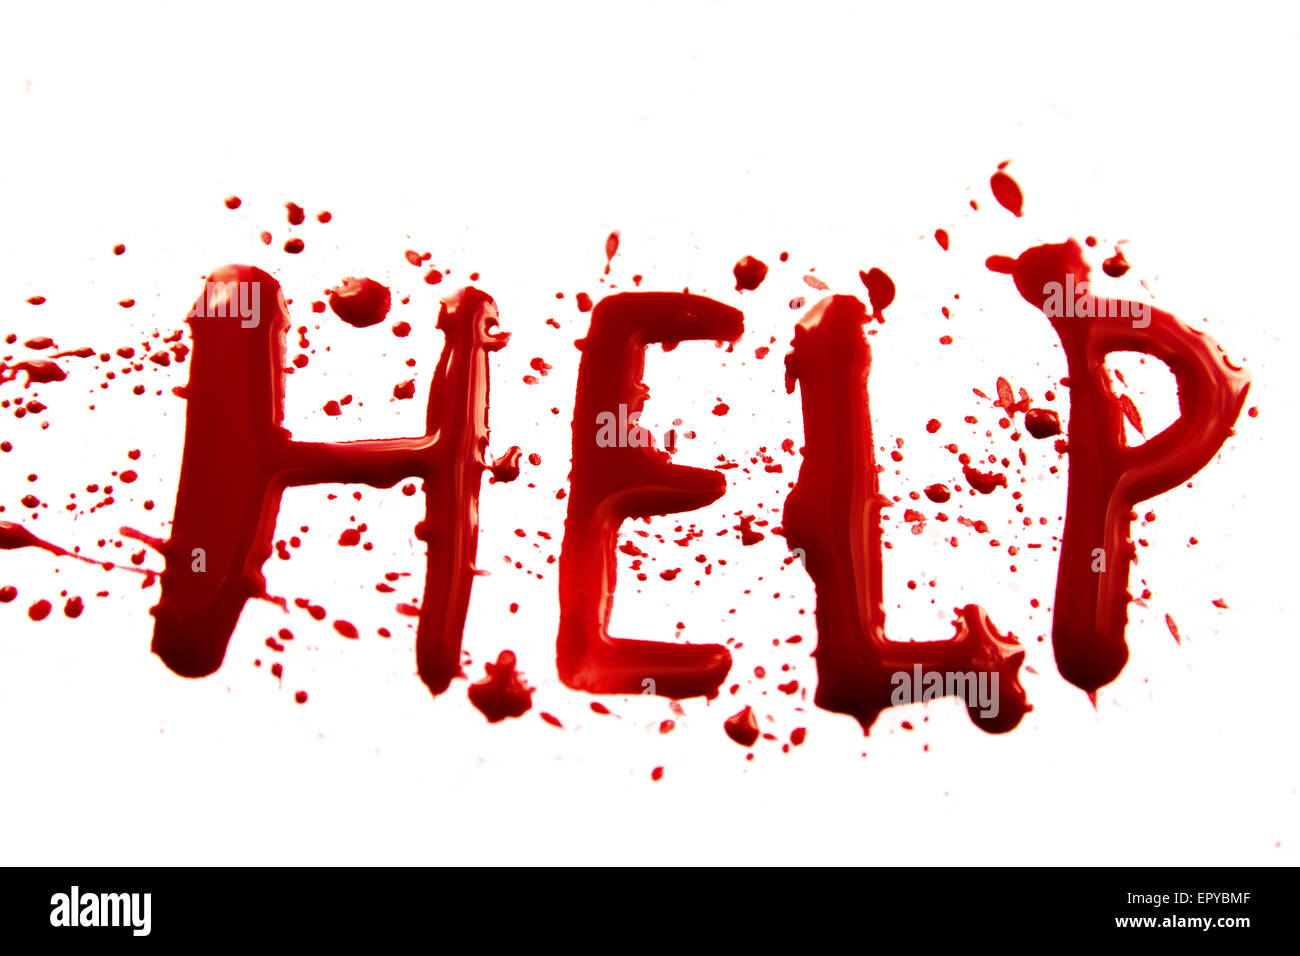 Bloody word Help with splatters, droplets, stains isolated on white background Stock Photo